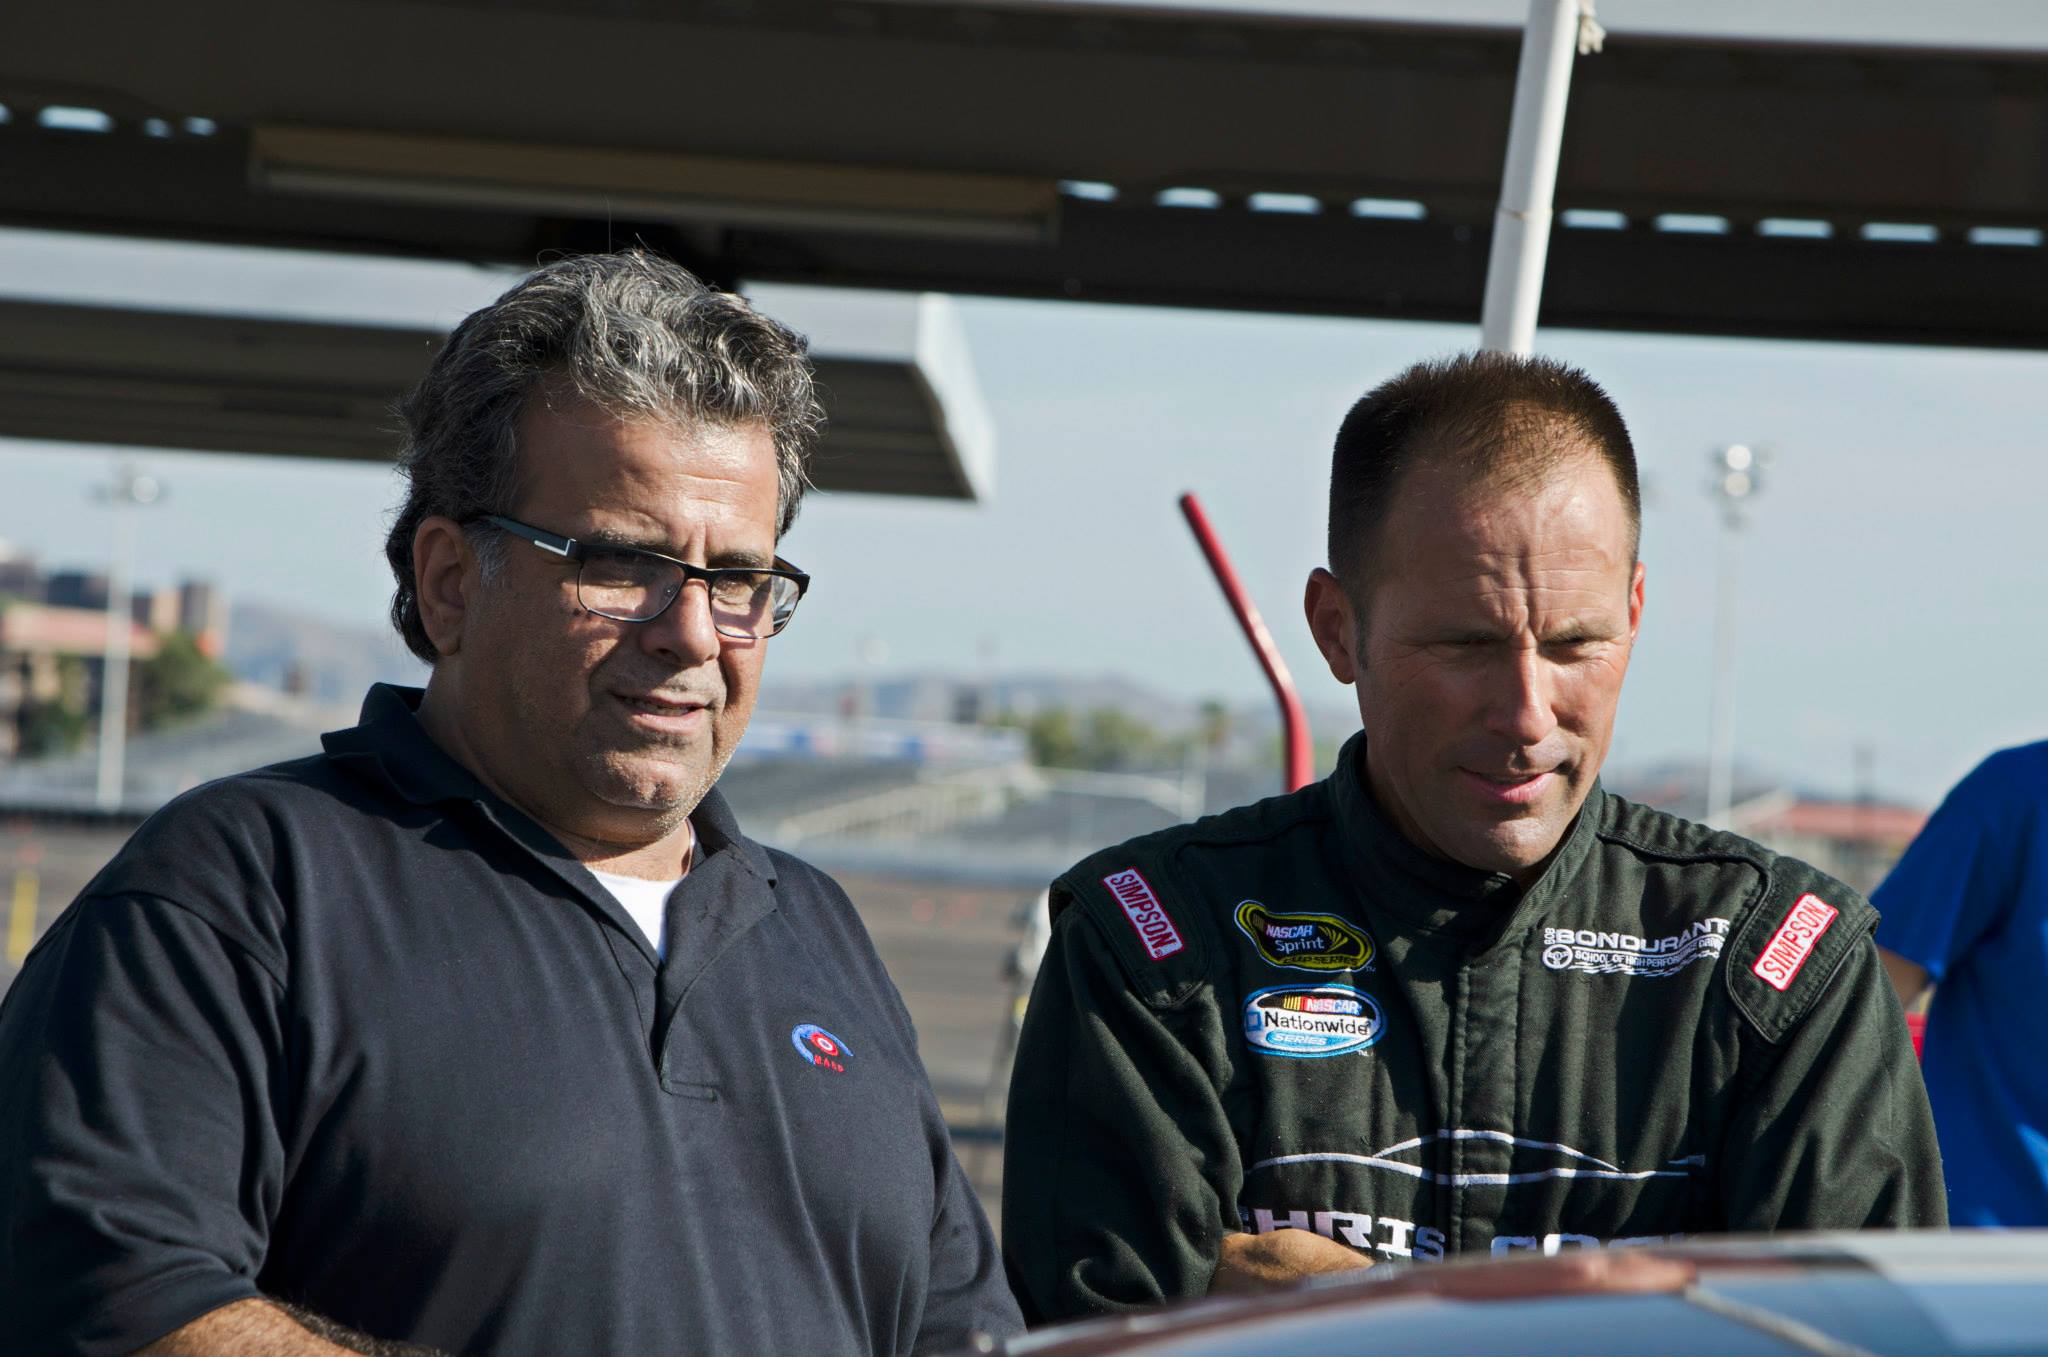 EP/Director George Nemeh On location with Chris Cook is an American professional race car driver and driving instructor